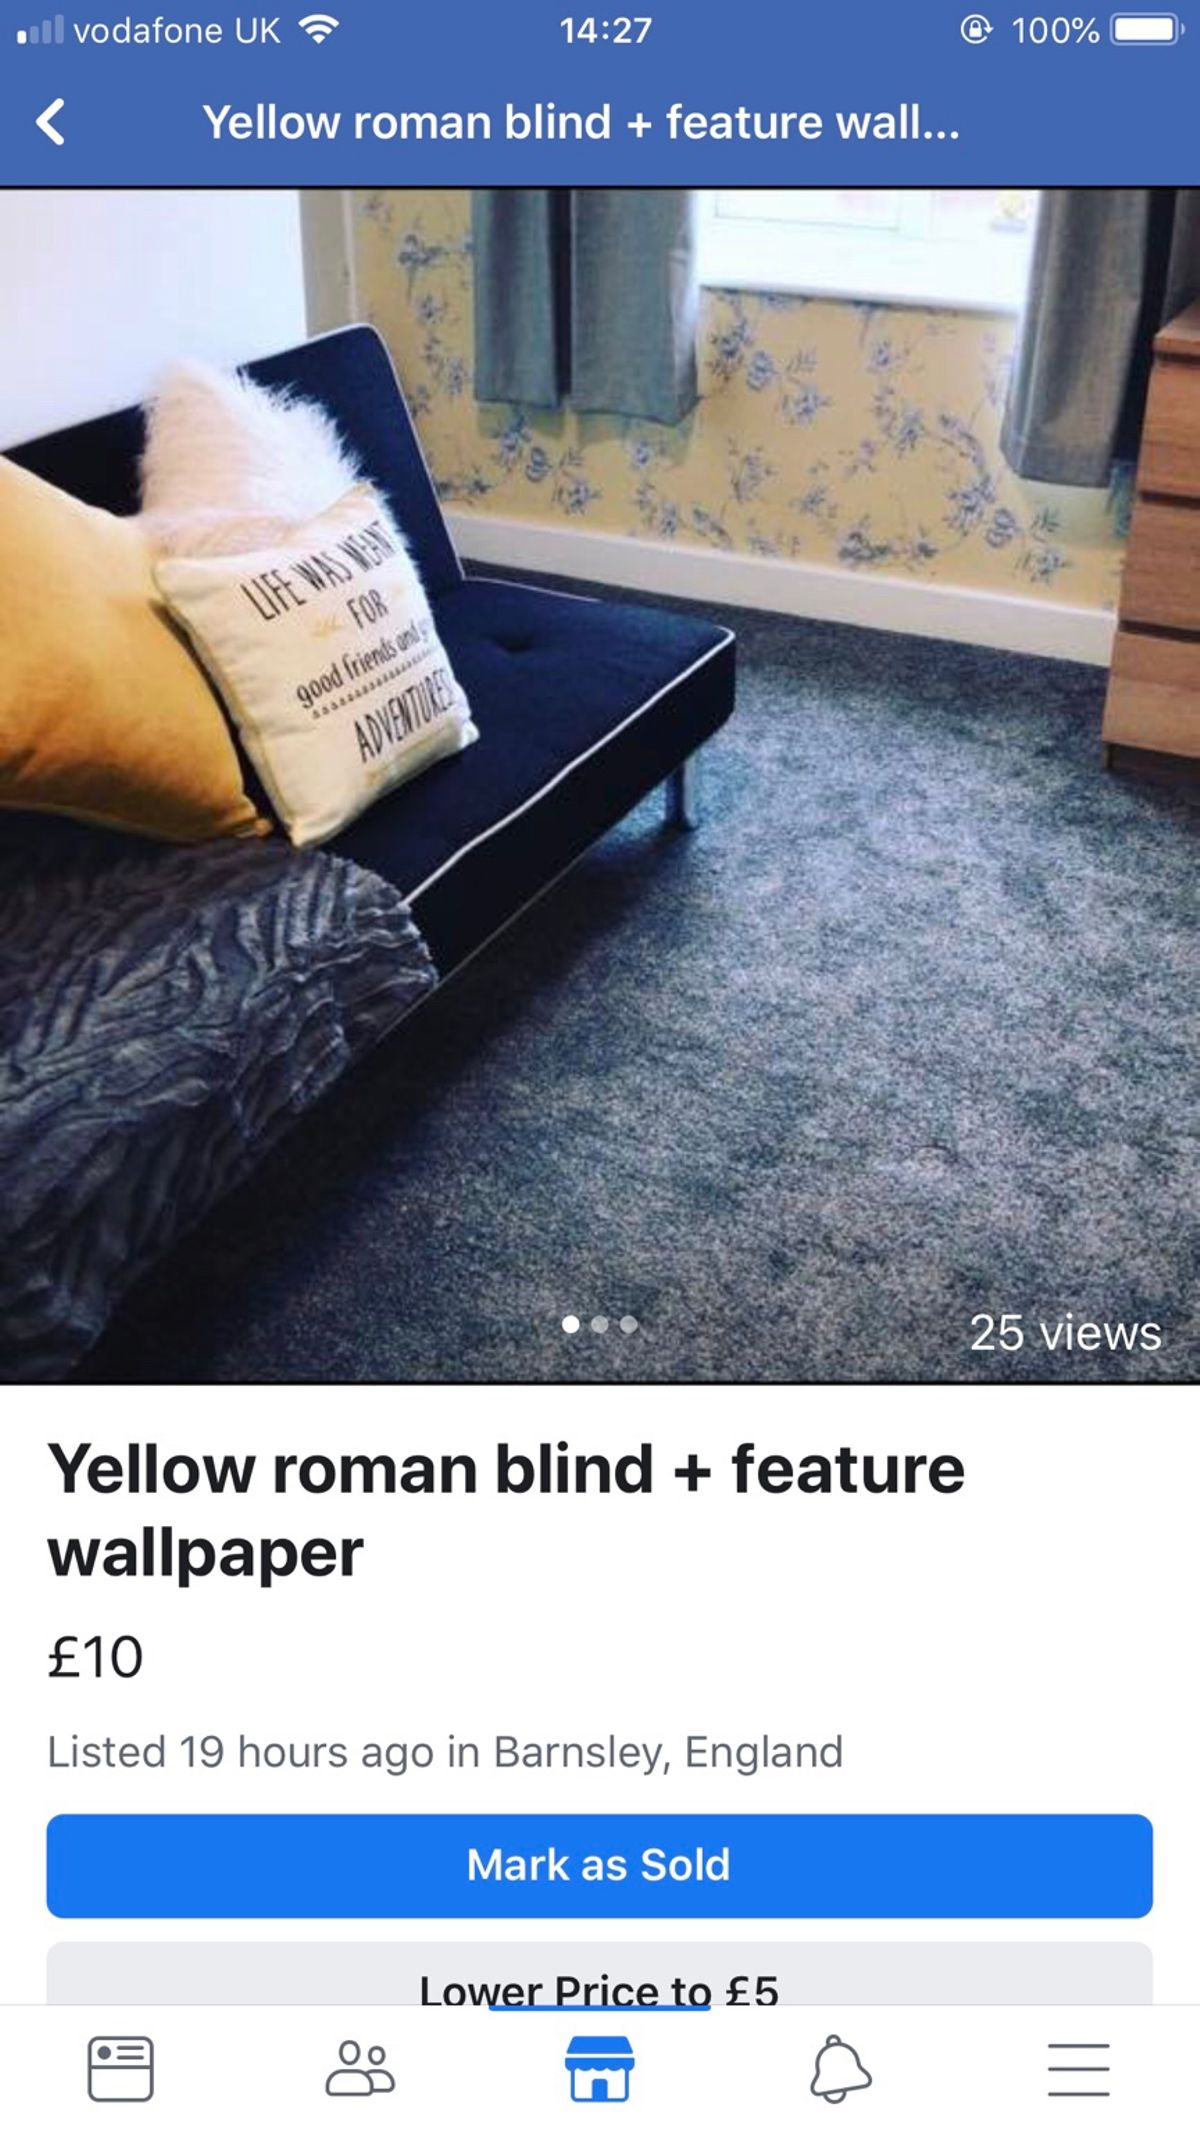 **blind And Wallpaper Included Only**
yellow Suede - Floor - HD Wallpaper 